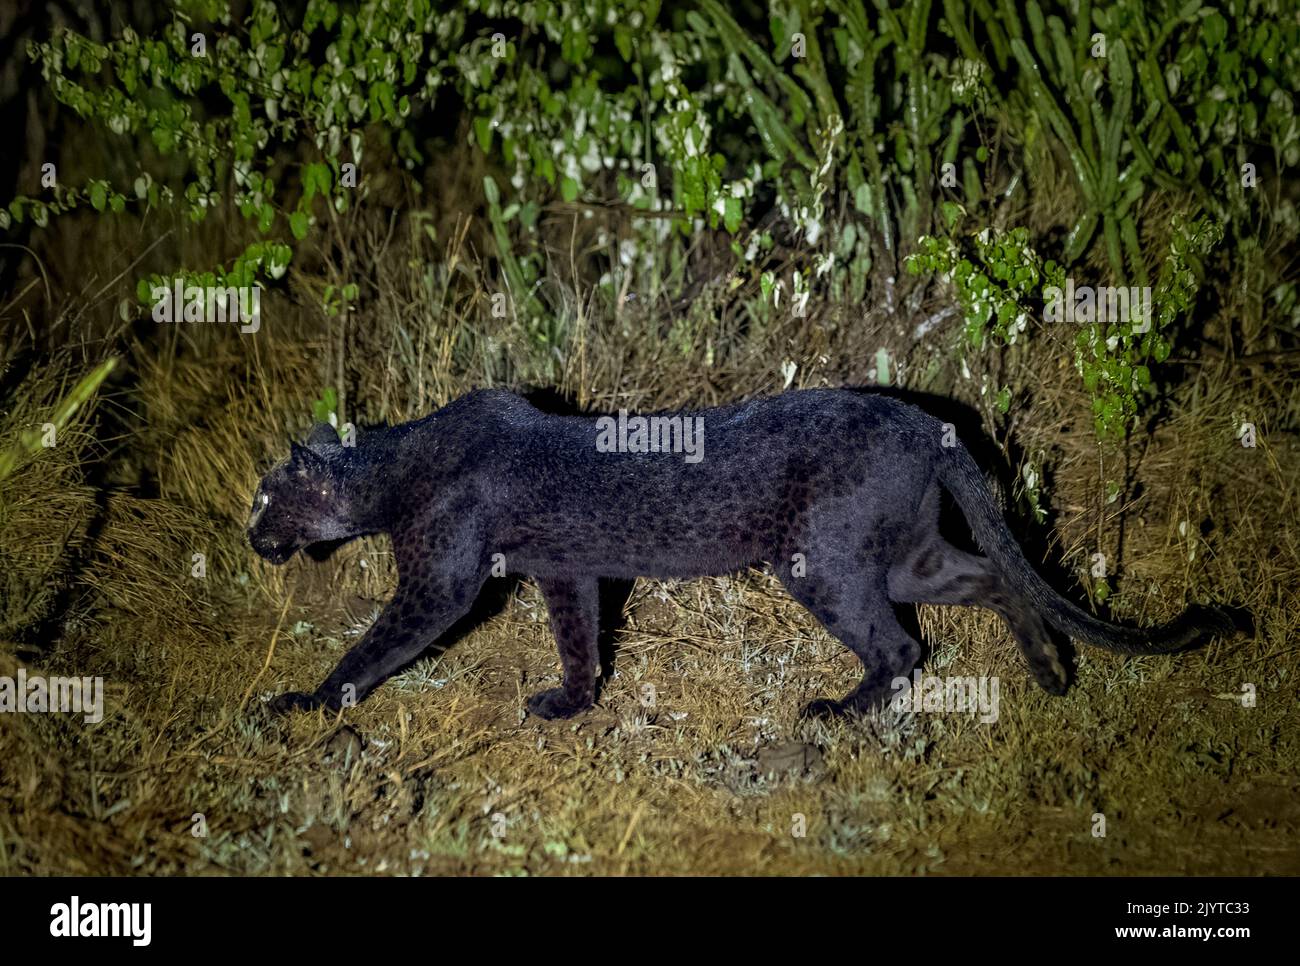 Extremely rare photo of a Black Panther or African Black Leopard (Panthera pardus pardus), melanistic form, evolving at night in dry shrubby savannah, very special leopard subspecies, Laikipia County, Kenya, East Africa, Africa Stock Photo